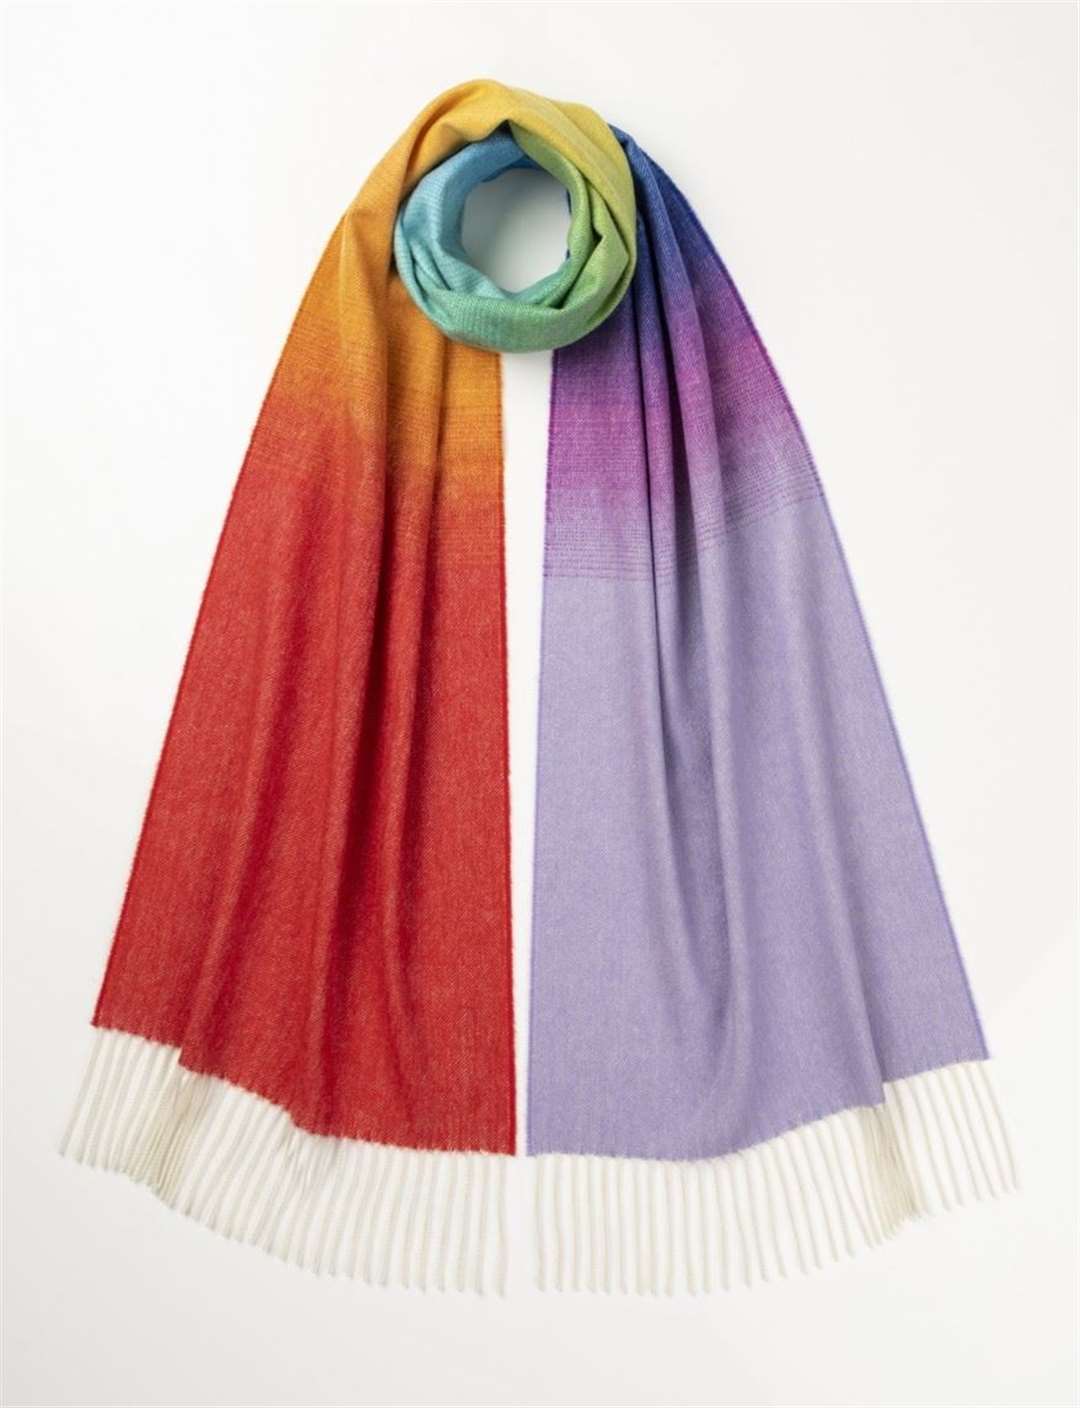 Johnstons of Elgin have designed this rainbow scarf to support the NHS.